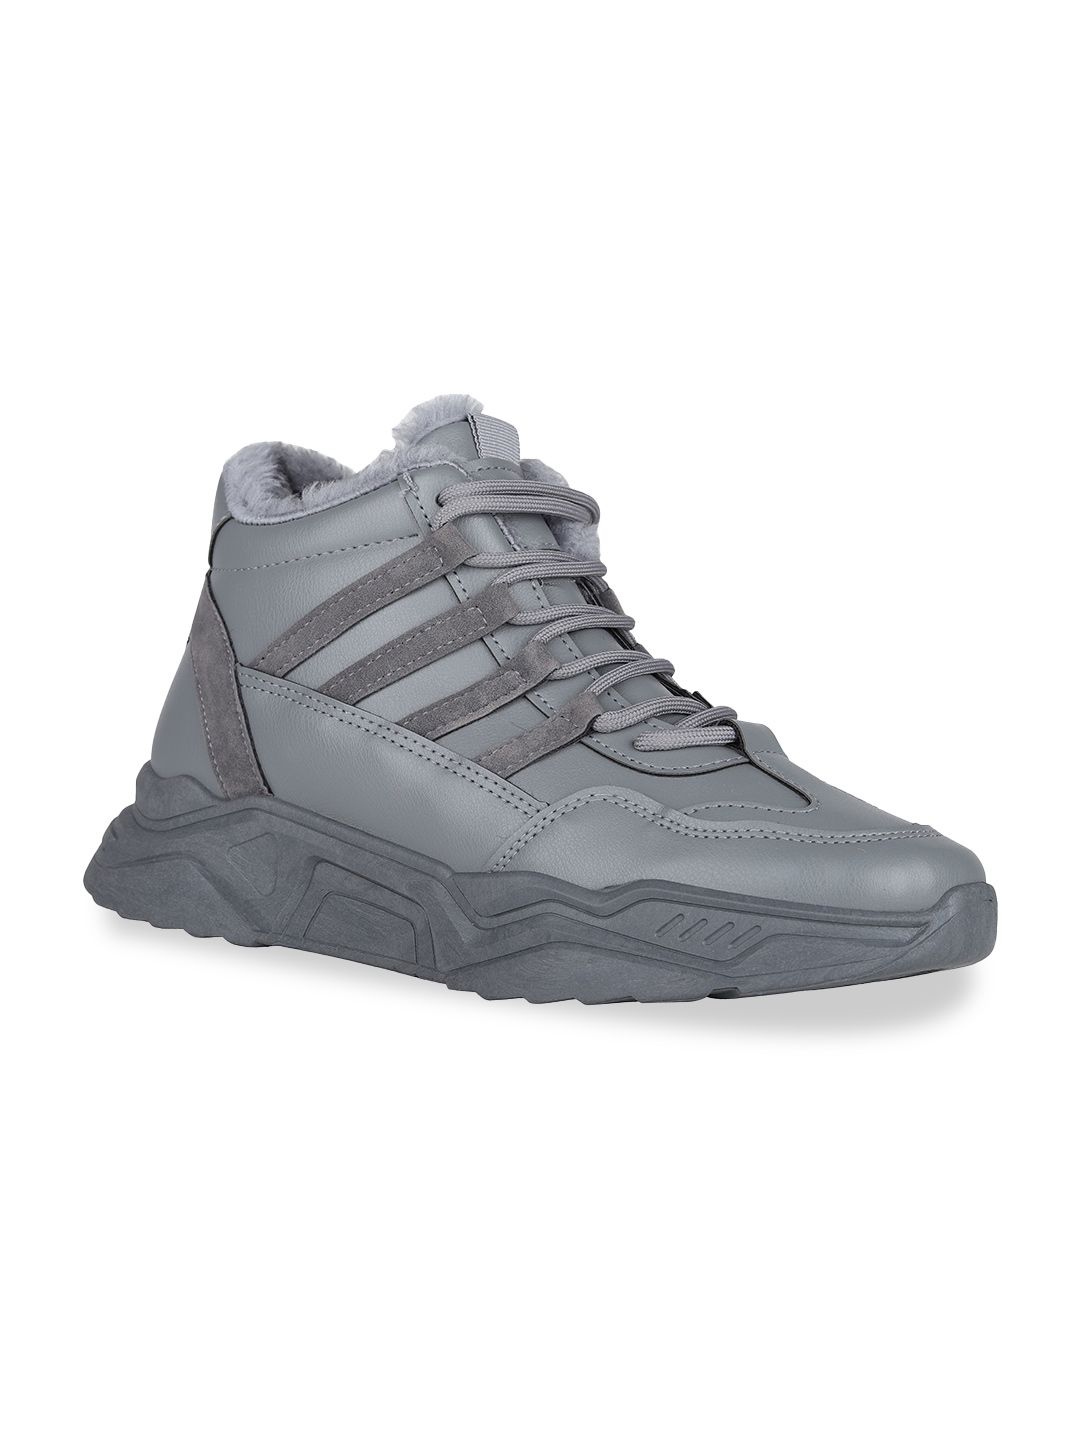 CASSIEY Women Grey High-Top Walking Shoes Price in India